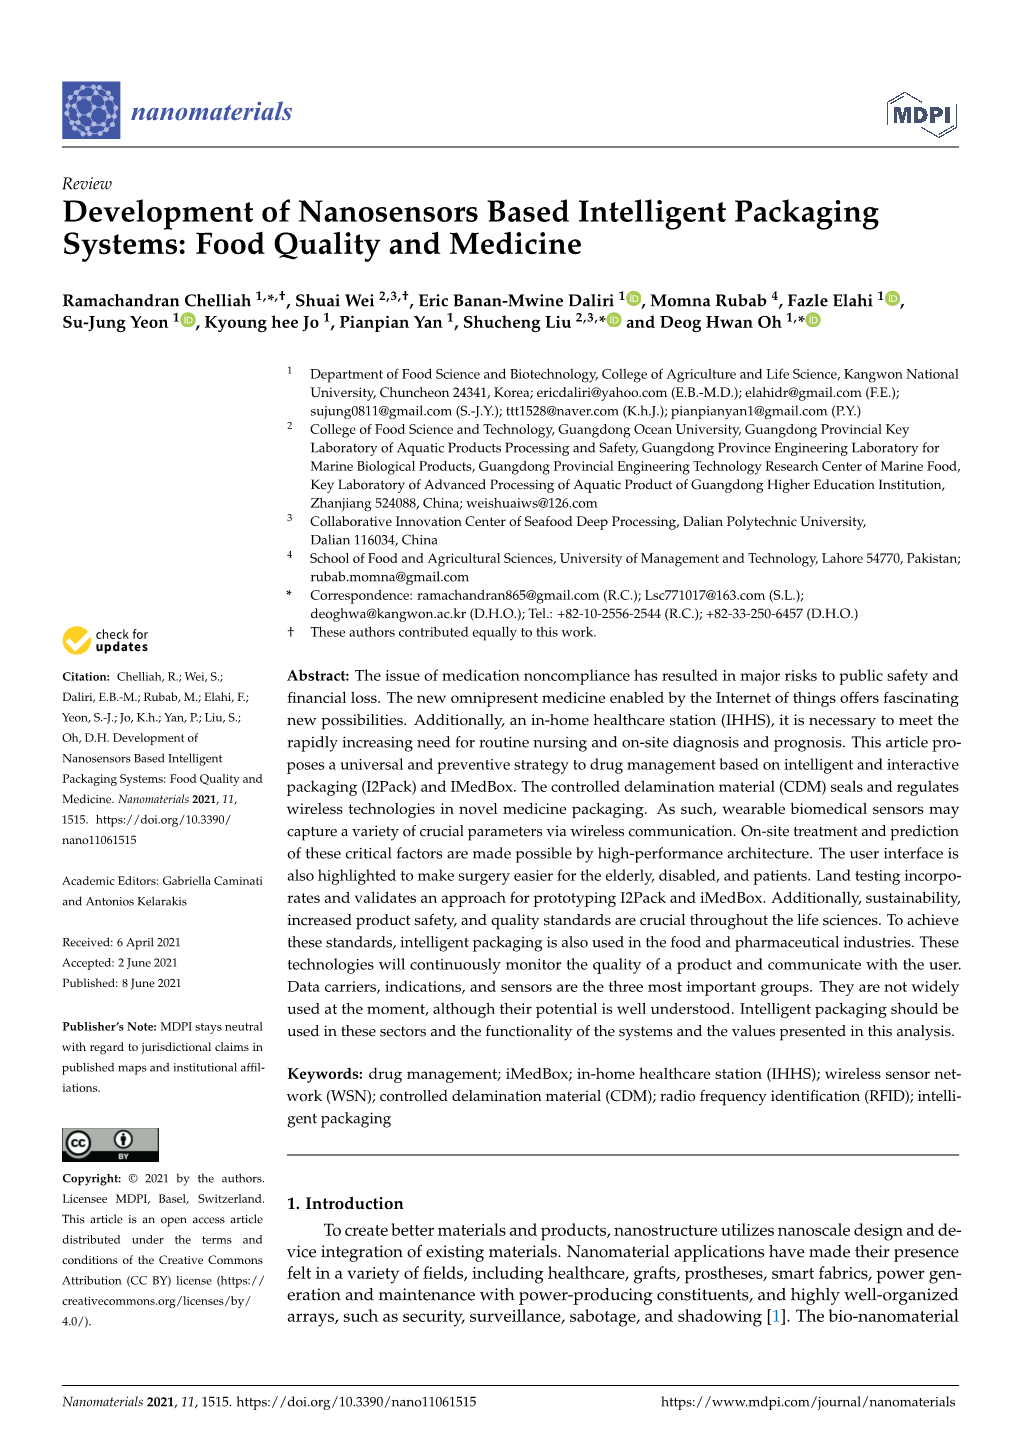 Development of Nanosensors Based Intelligent Packaging Systems: Food Quality and Medicine